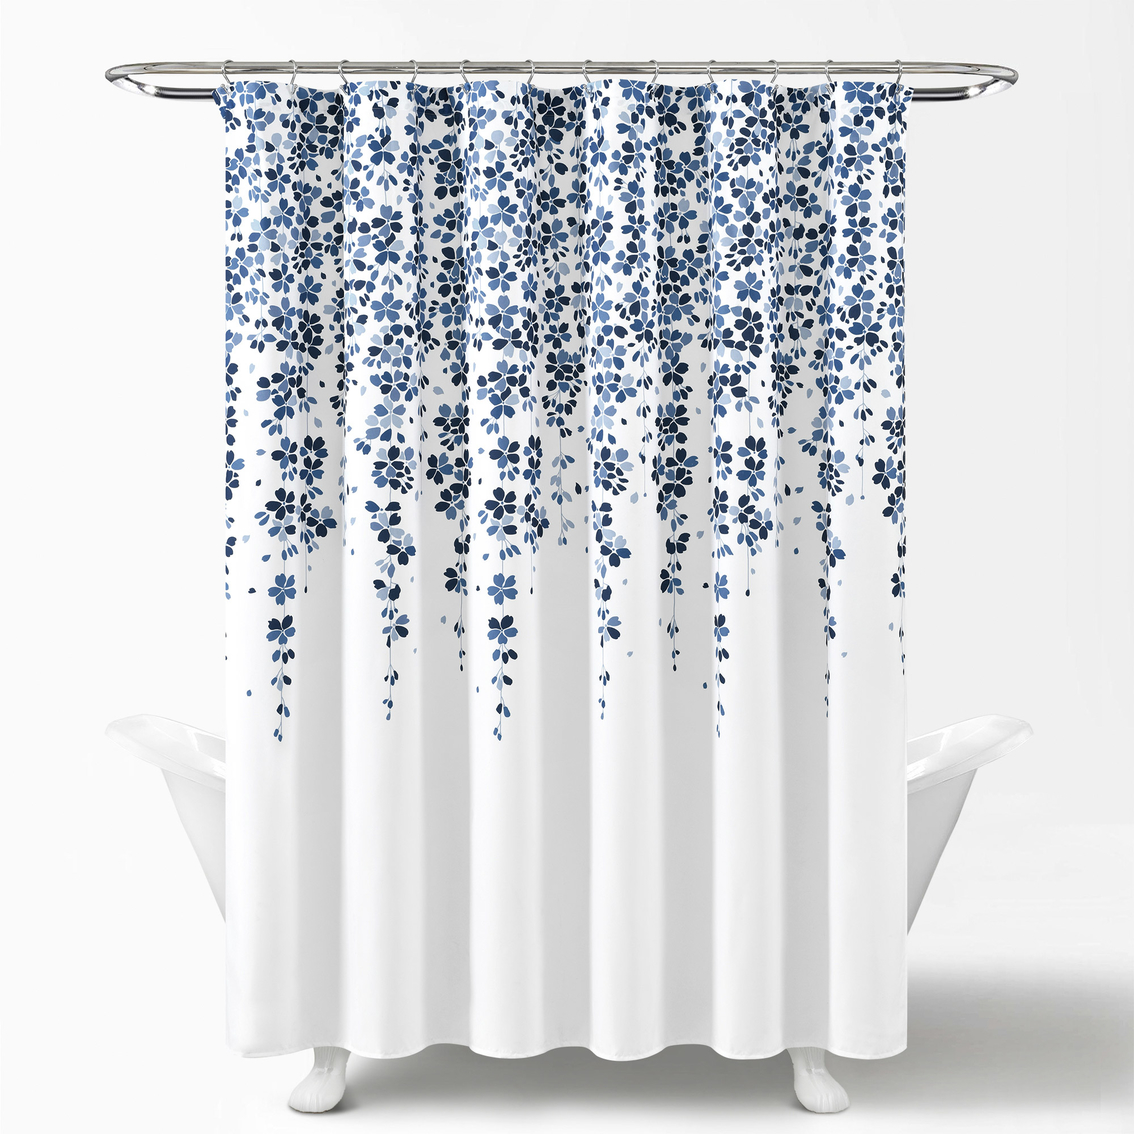 Lush Decor Weeping Flower Shower Curtain 72 x 72 - Image 4 of 6